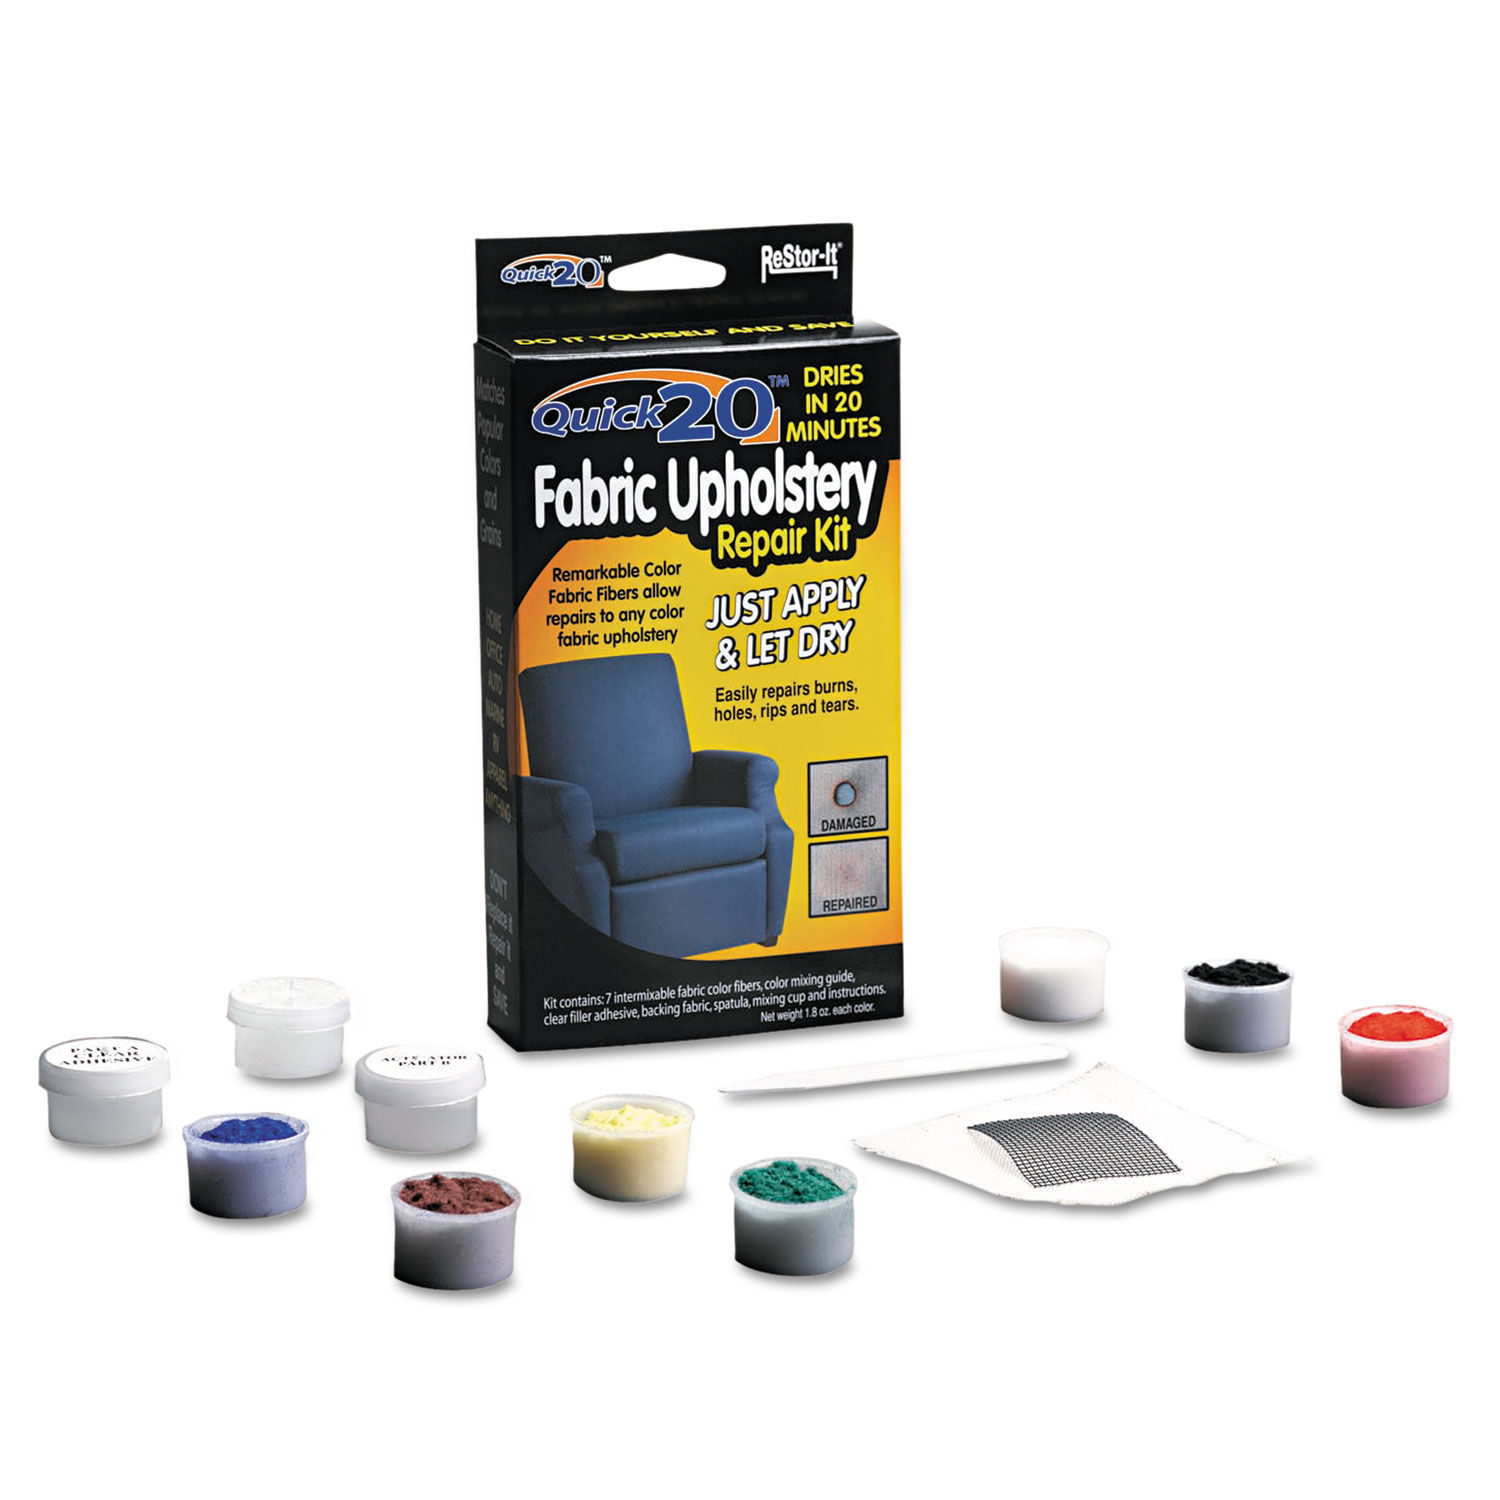 ReStor-It Quick 20 Fabric/Upholstery Repair Kit by Master Caster® MAS18085